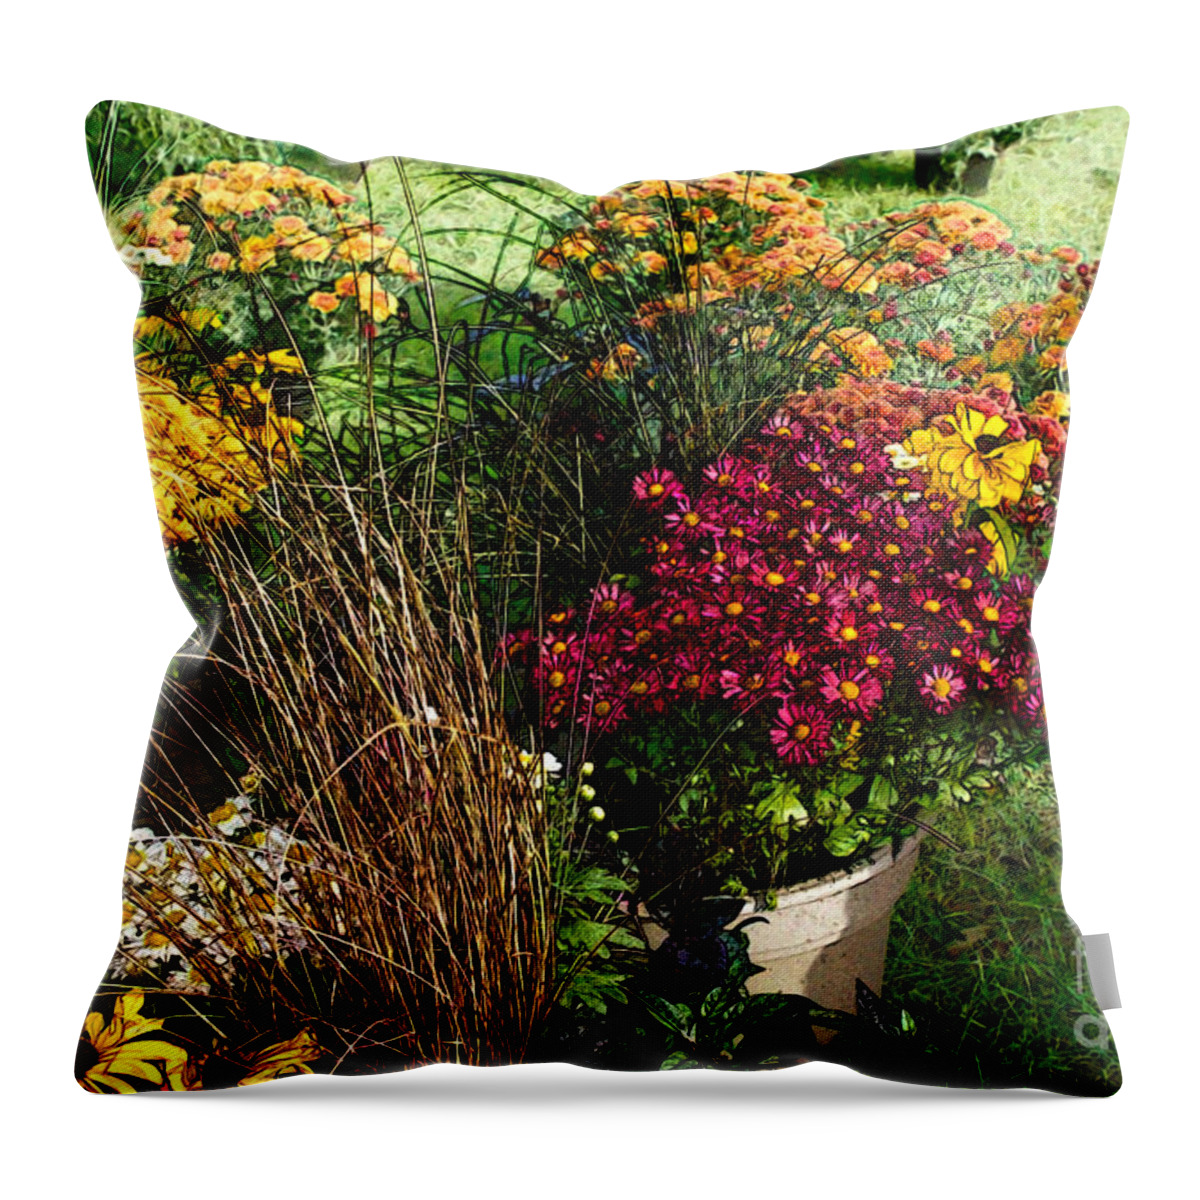 Floral Throw Pillow featuring the digital art Flowers For Sale by David Blank